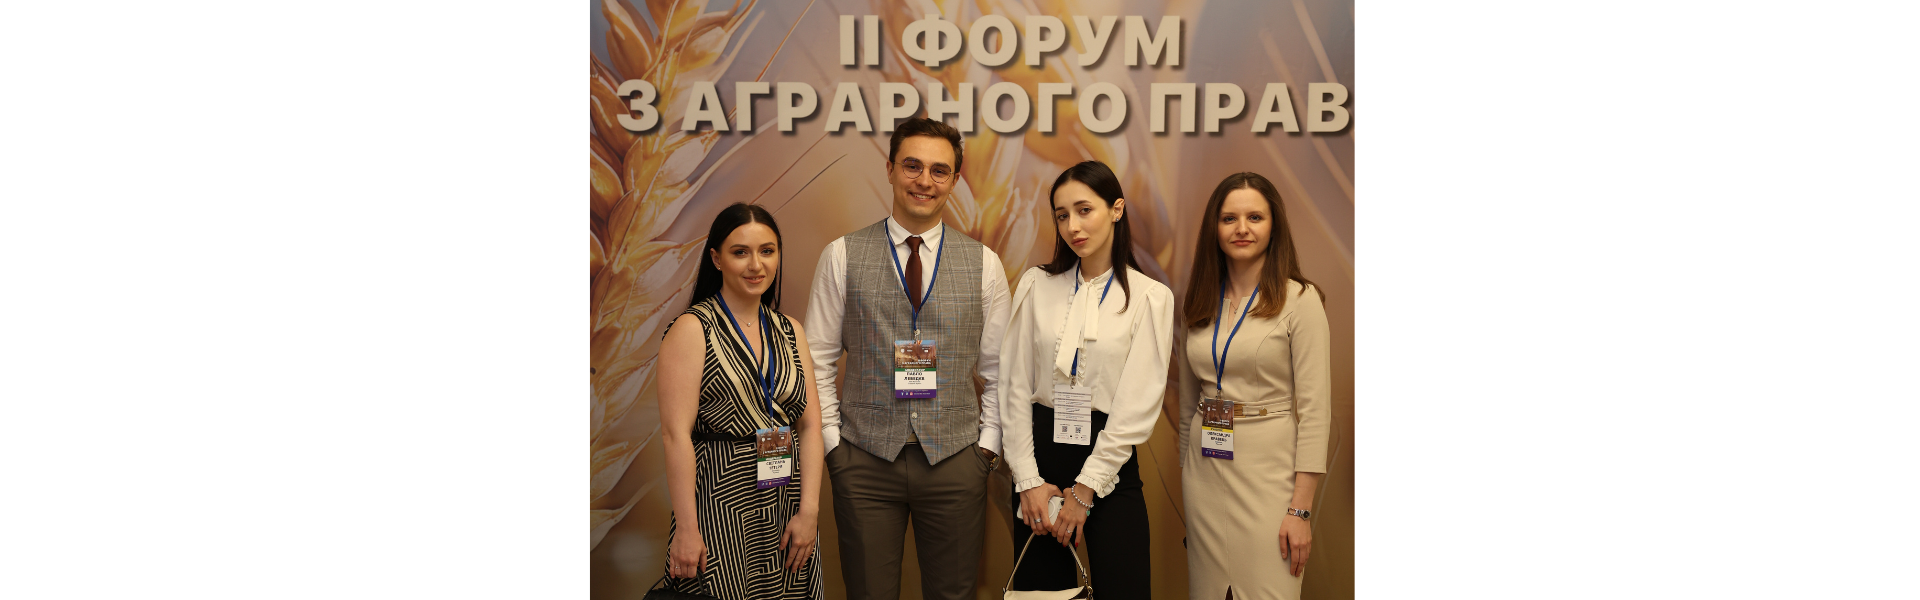 EVERLEGAL Counsel moderated a session at the II Forum on Agrarian Law 